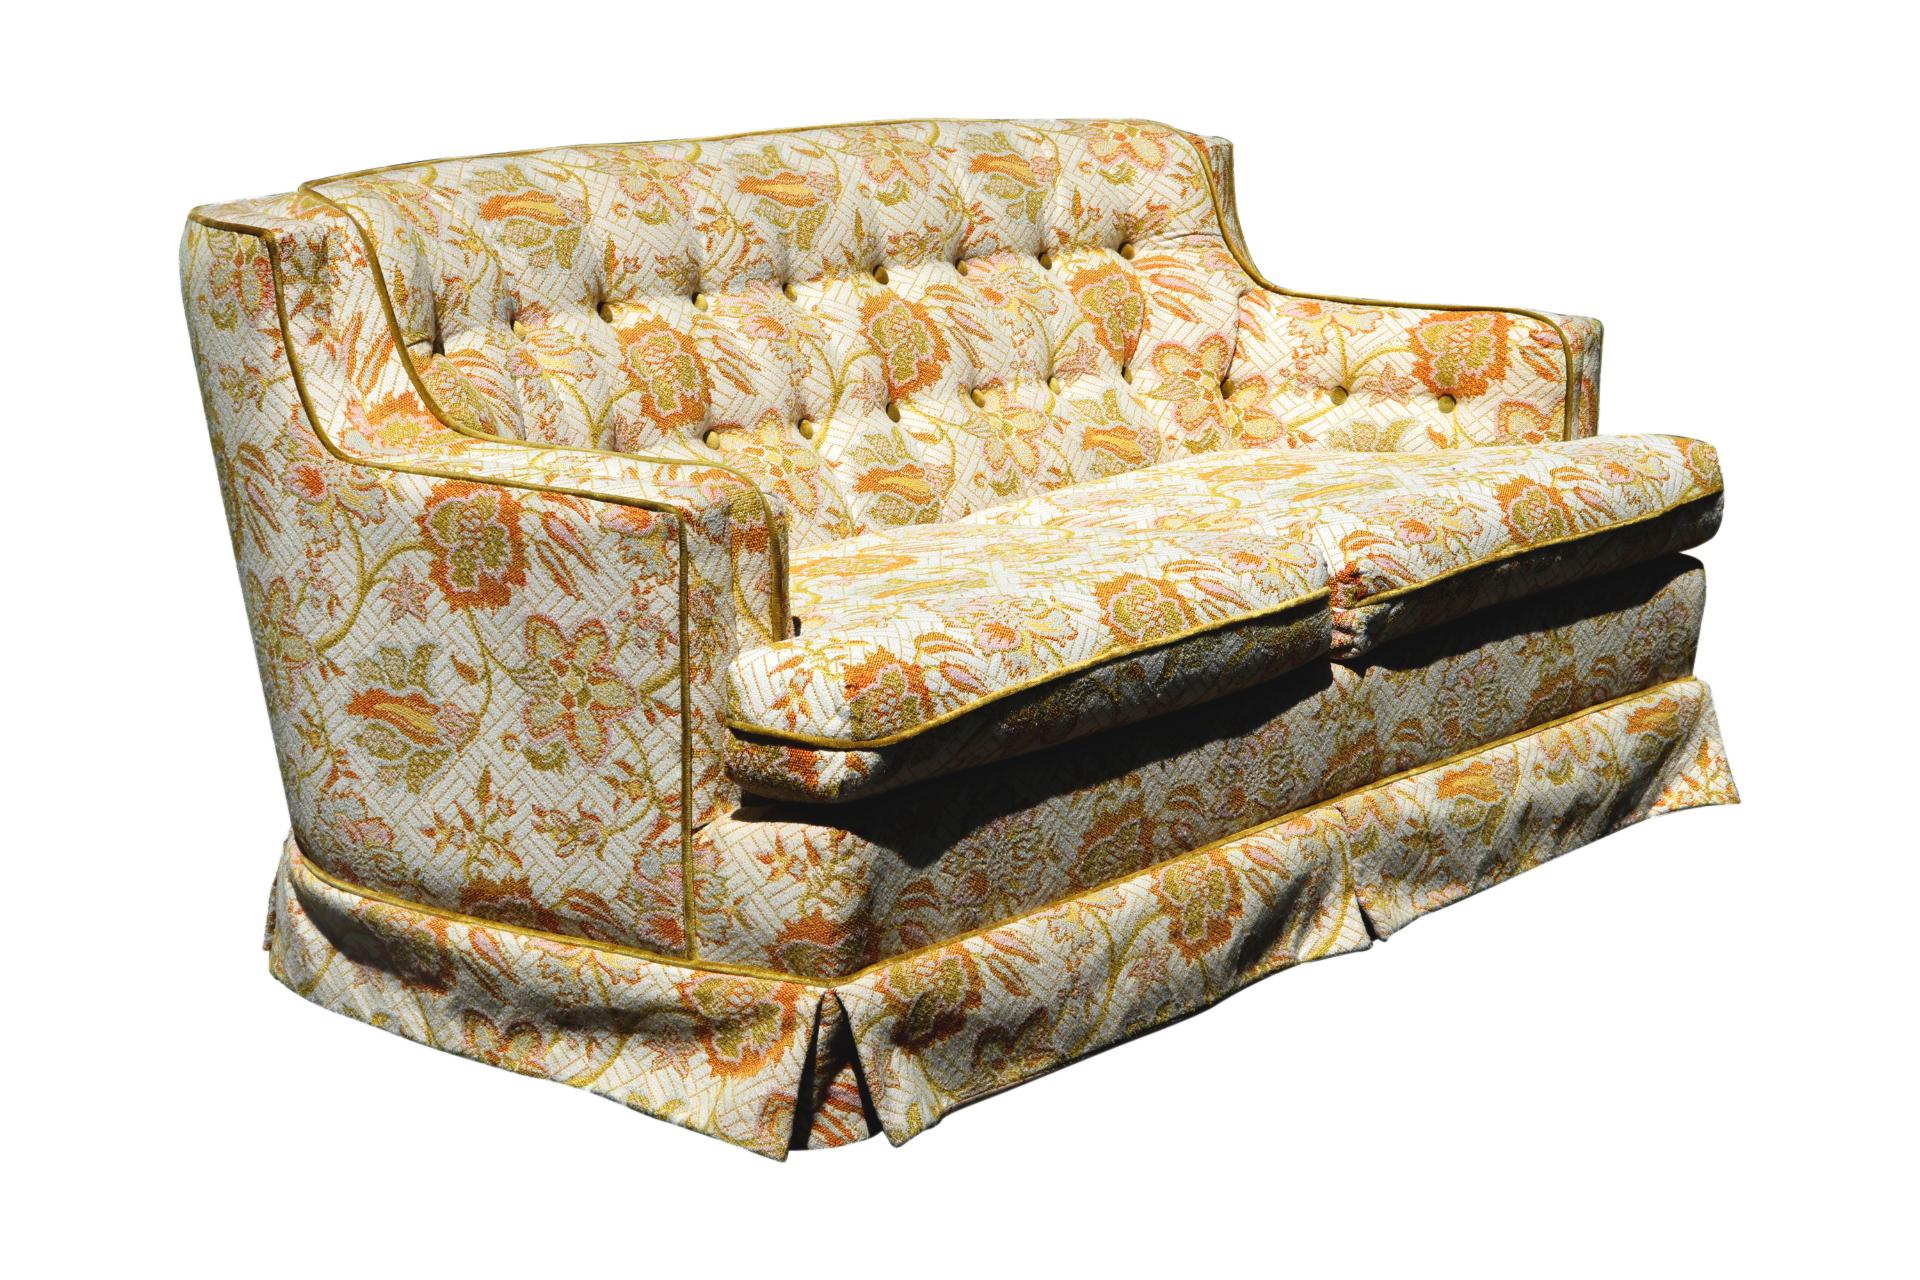 A mid-century tufted floral loveseat sofa made by Style House Custom Furniture for Montgomery Ward, dated 1967. The sofa has a low profile with curved corners that meet flat arms. Upholstered throughout in a bold jacquard fabric decorated with